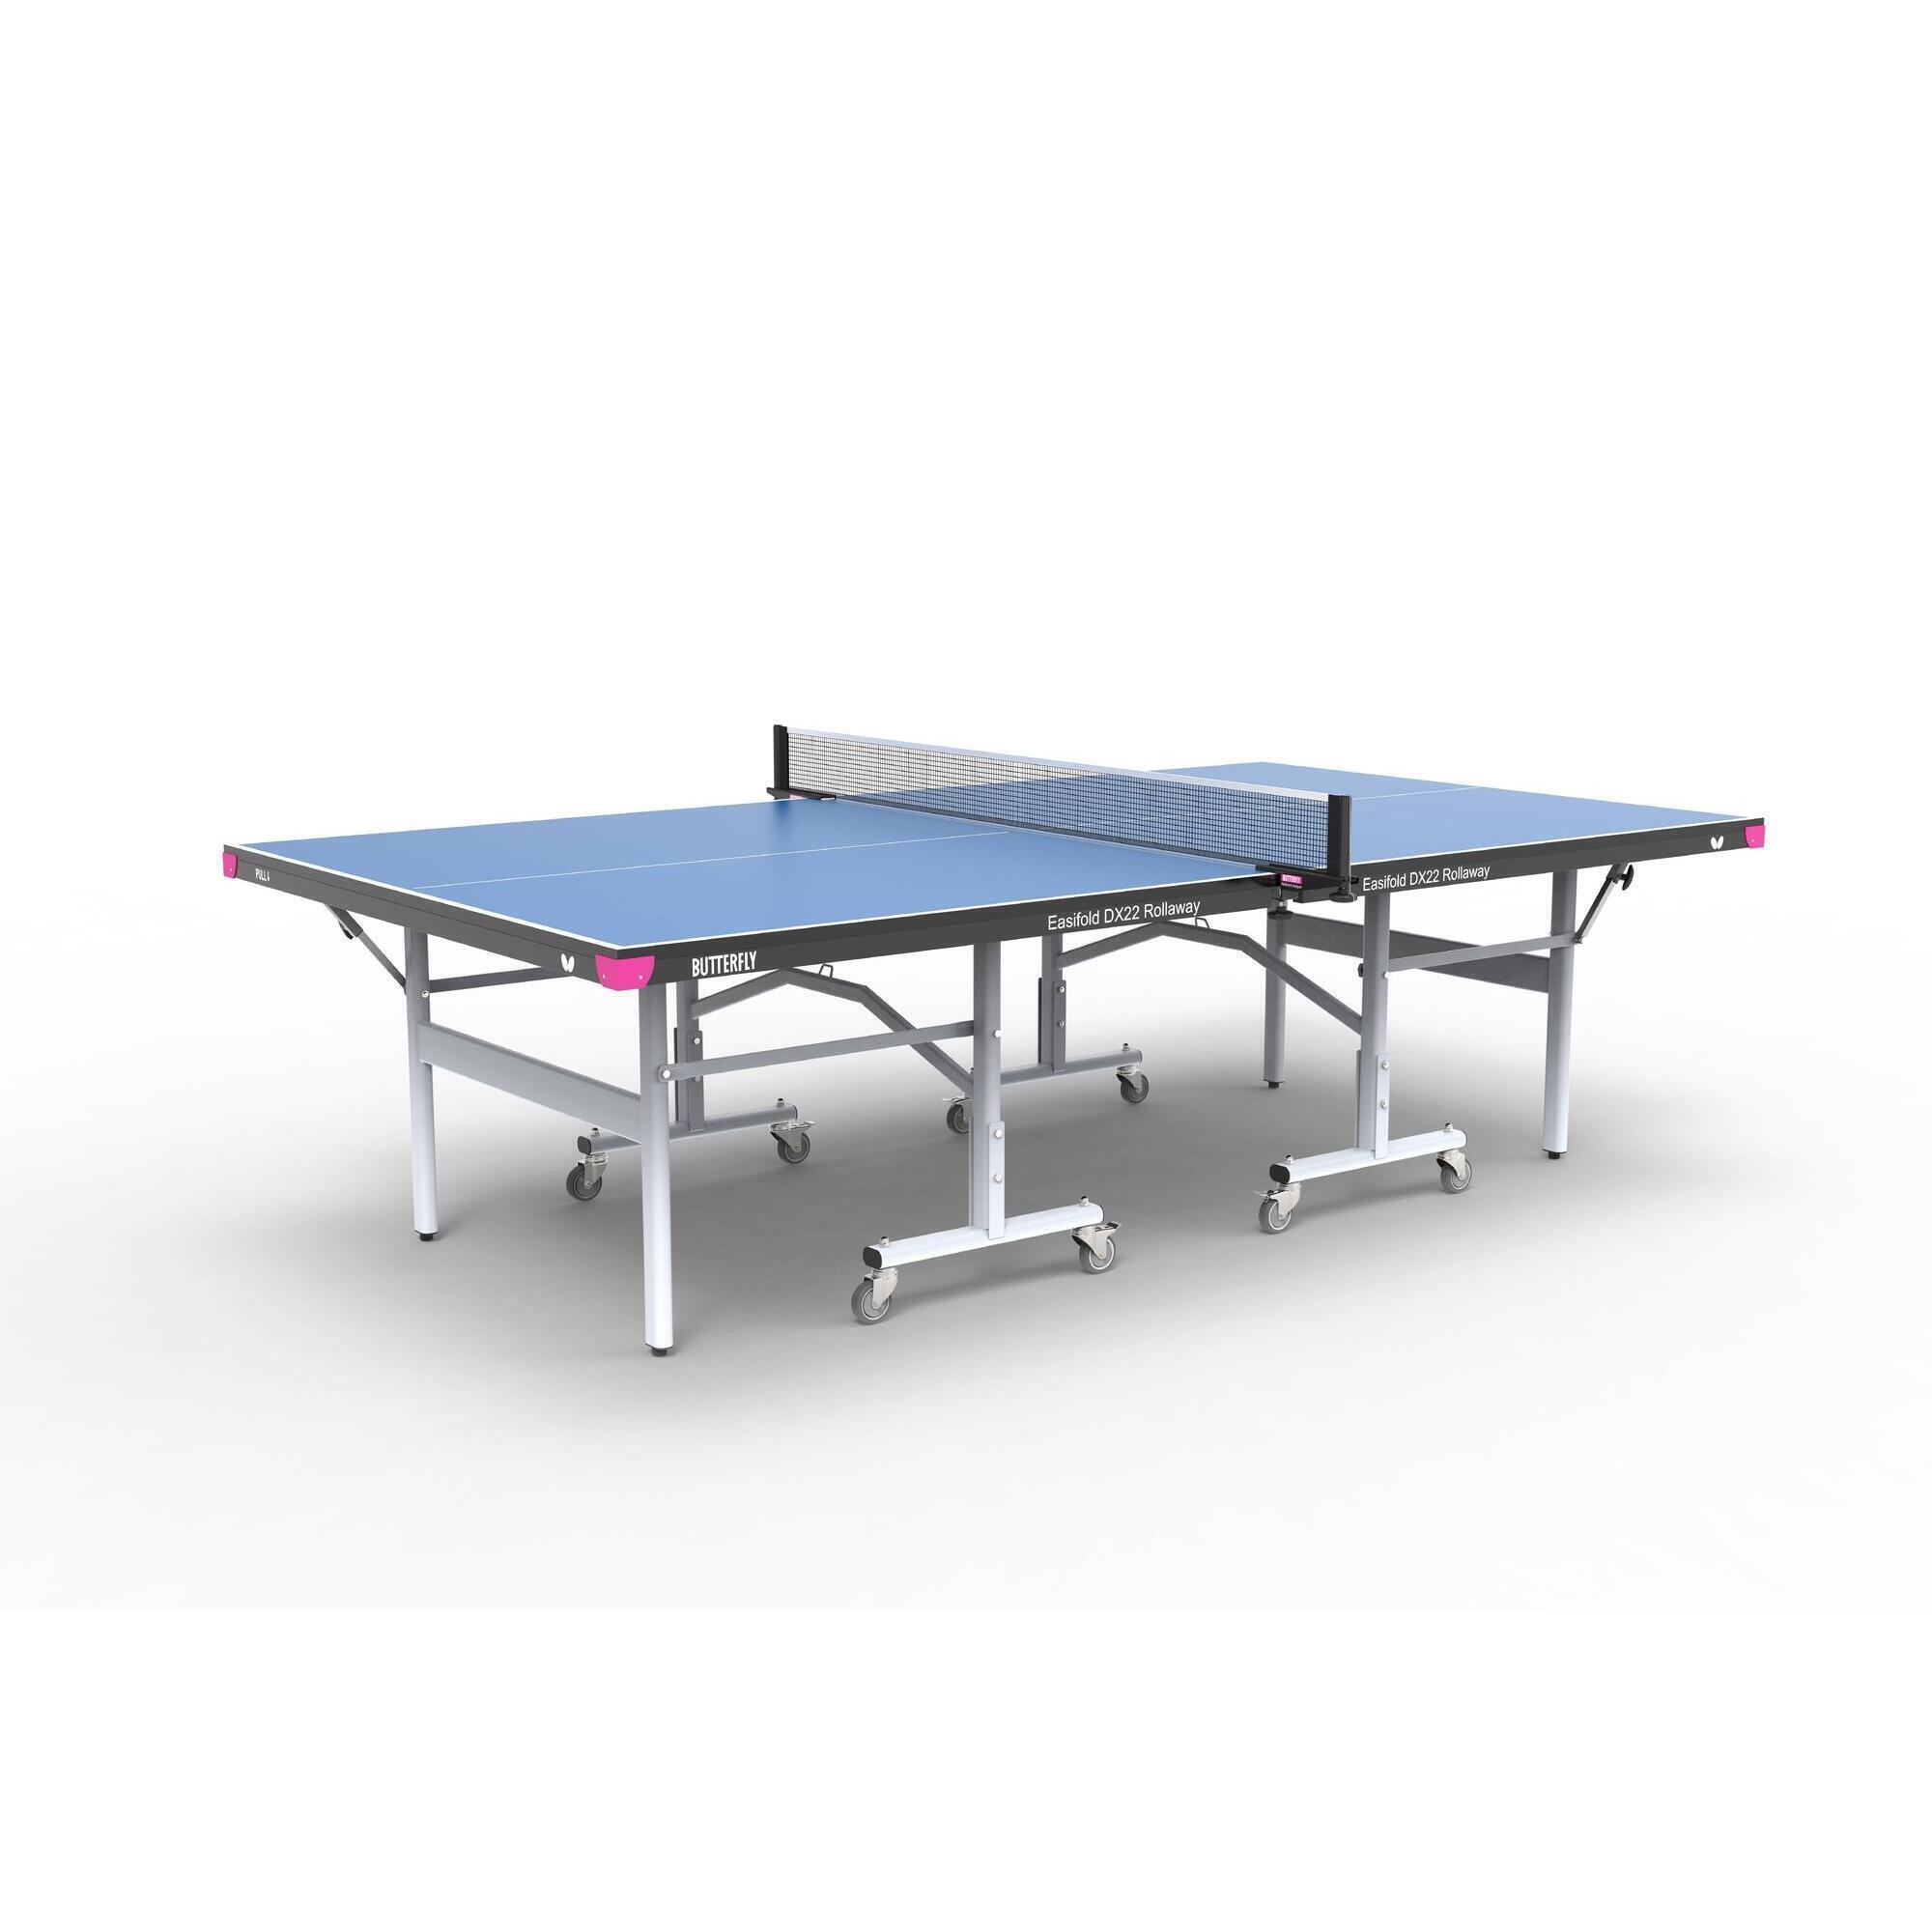 Butterfly Easifold Deluxe 22 Rollaway Table Tennis Table Blue 1/3